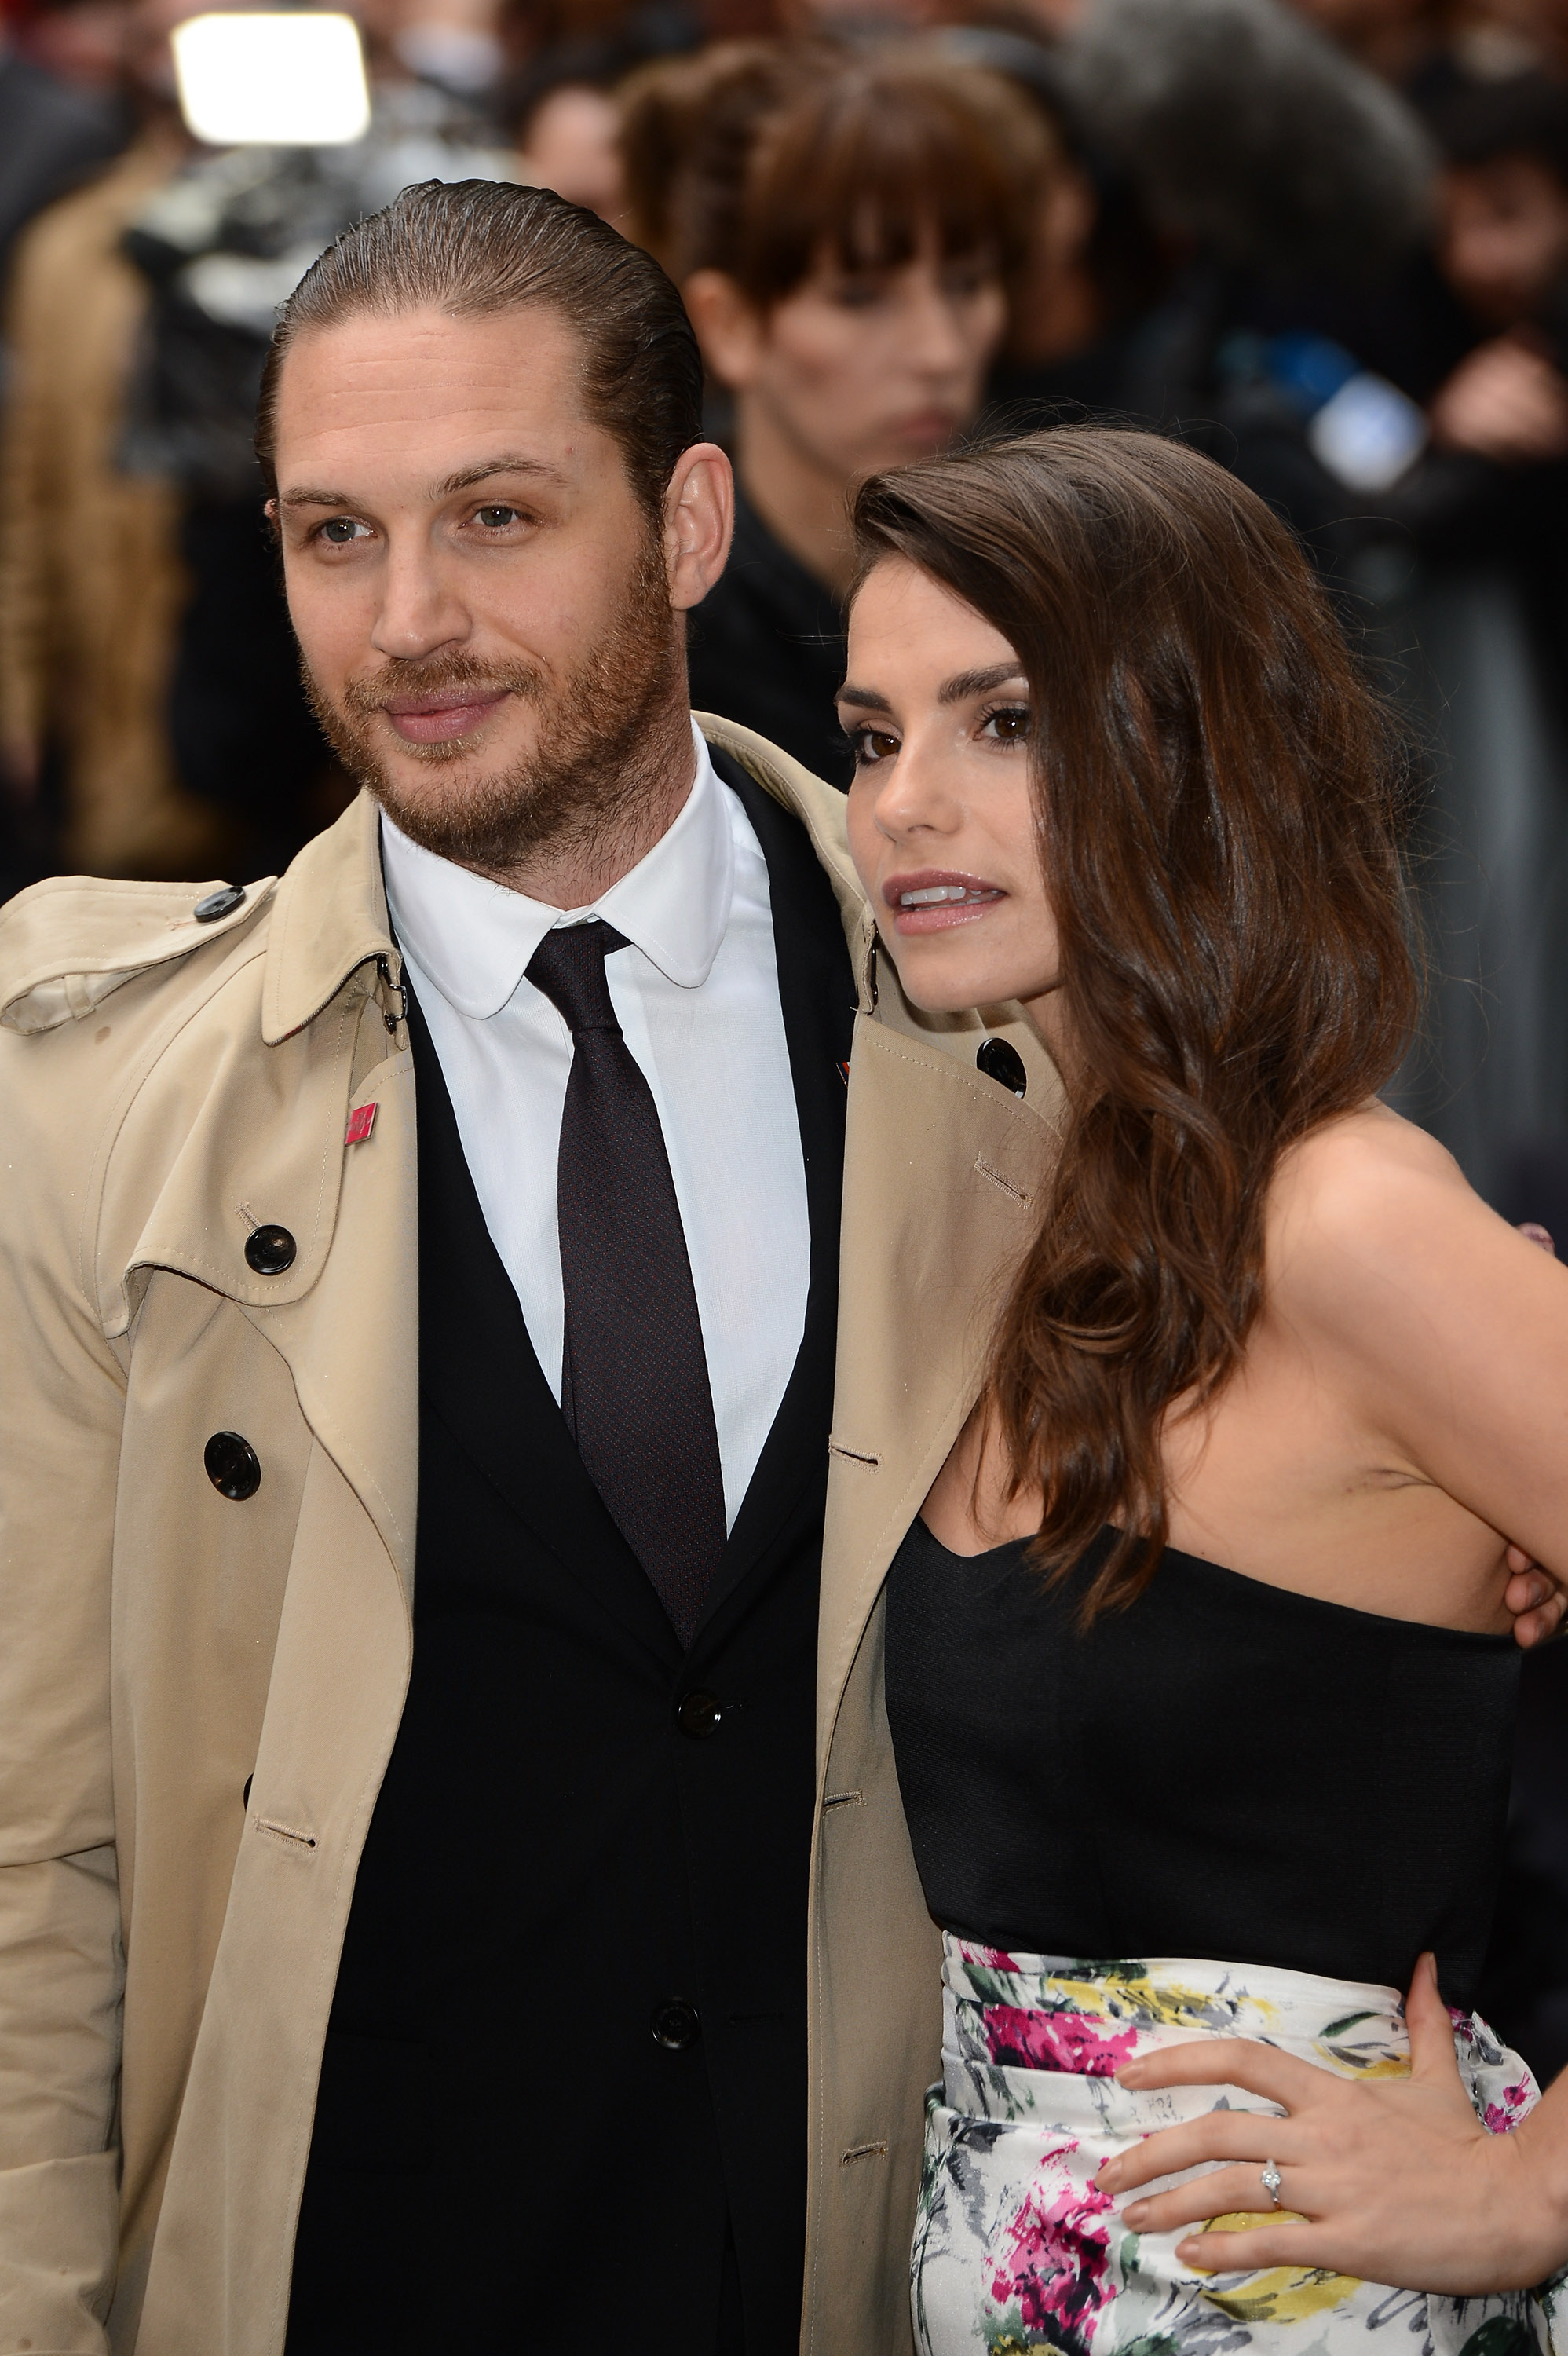 Tom Hardy Posed With Fiancée Charlotte Riley The Dark Knight Rises